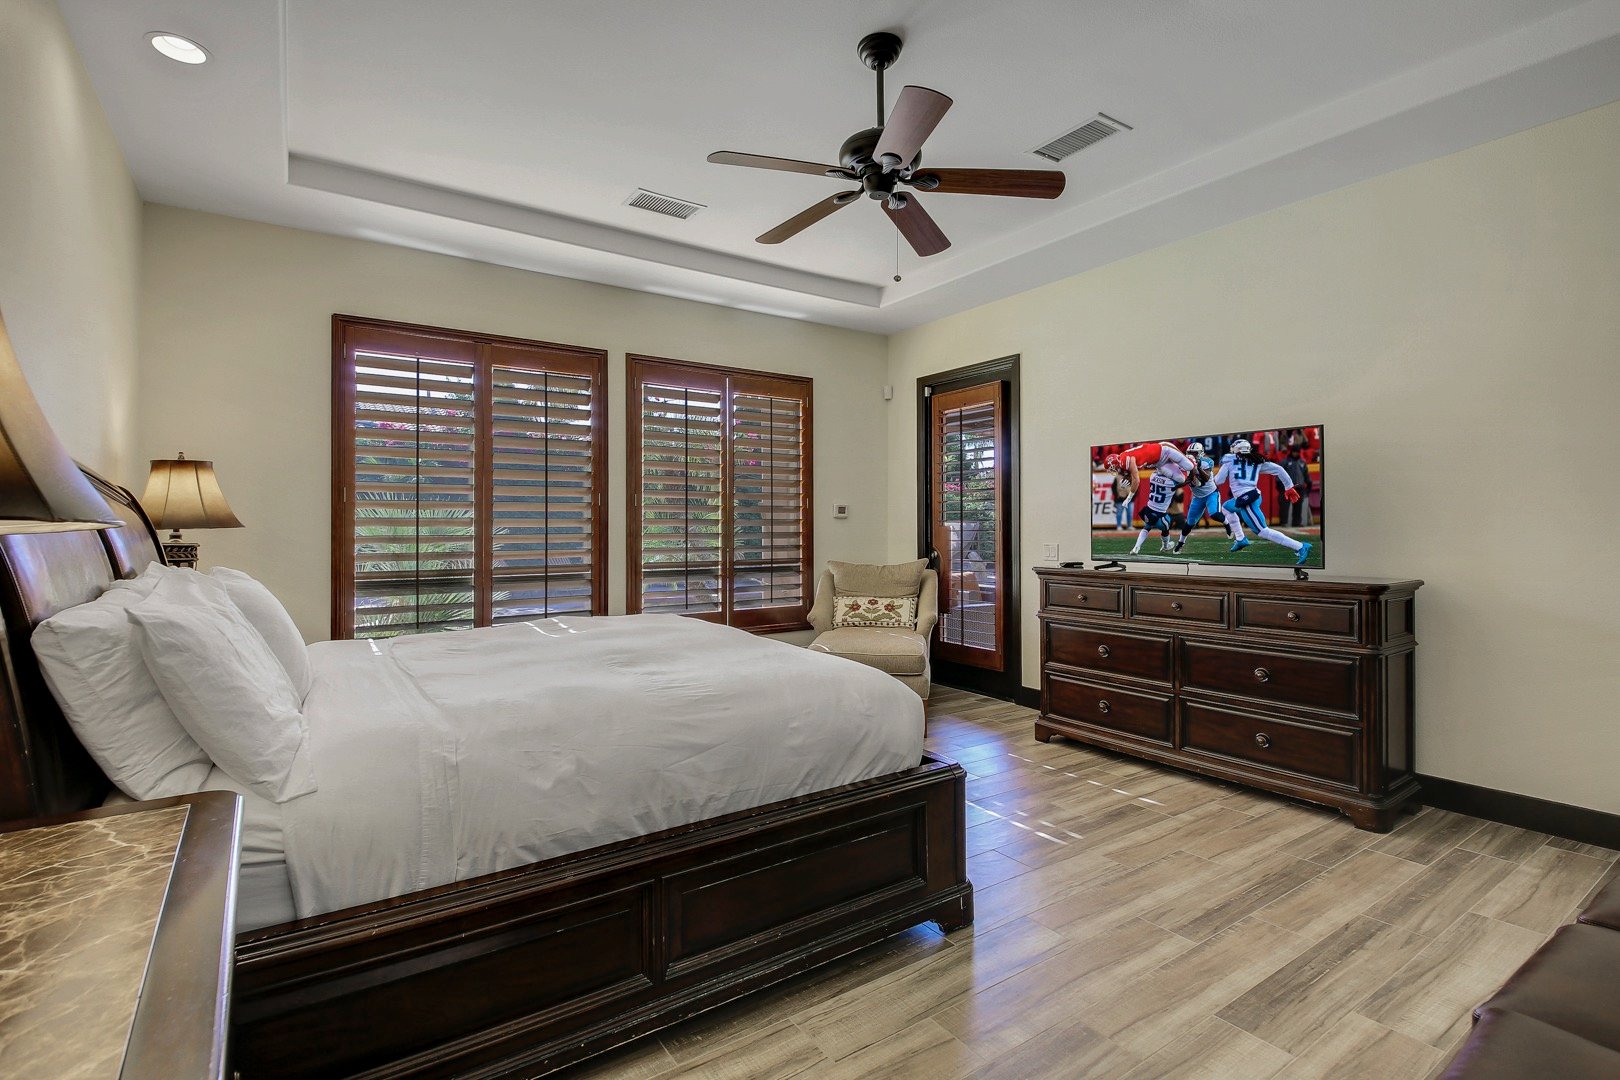 The master bedroom has its own separate access to backyard pool area!